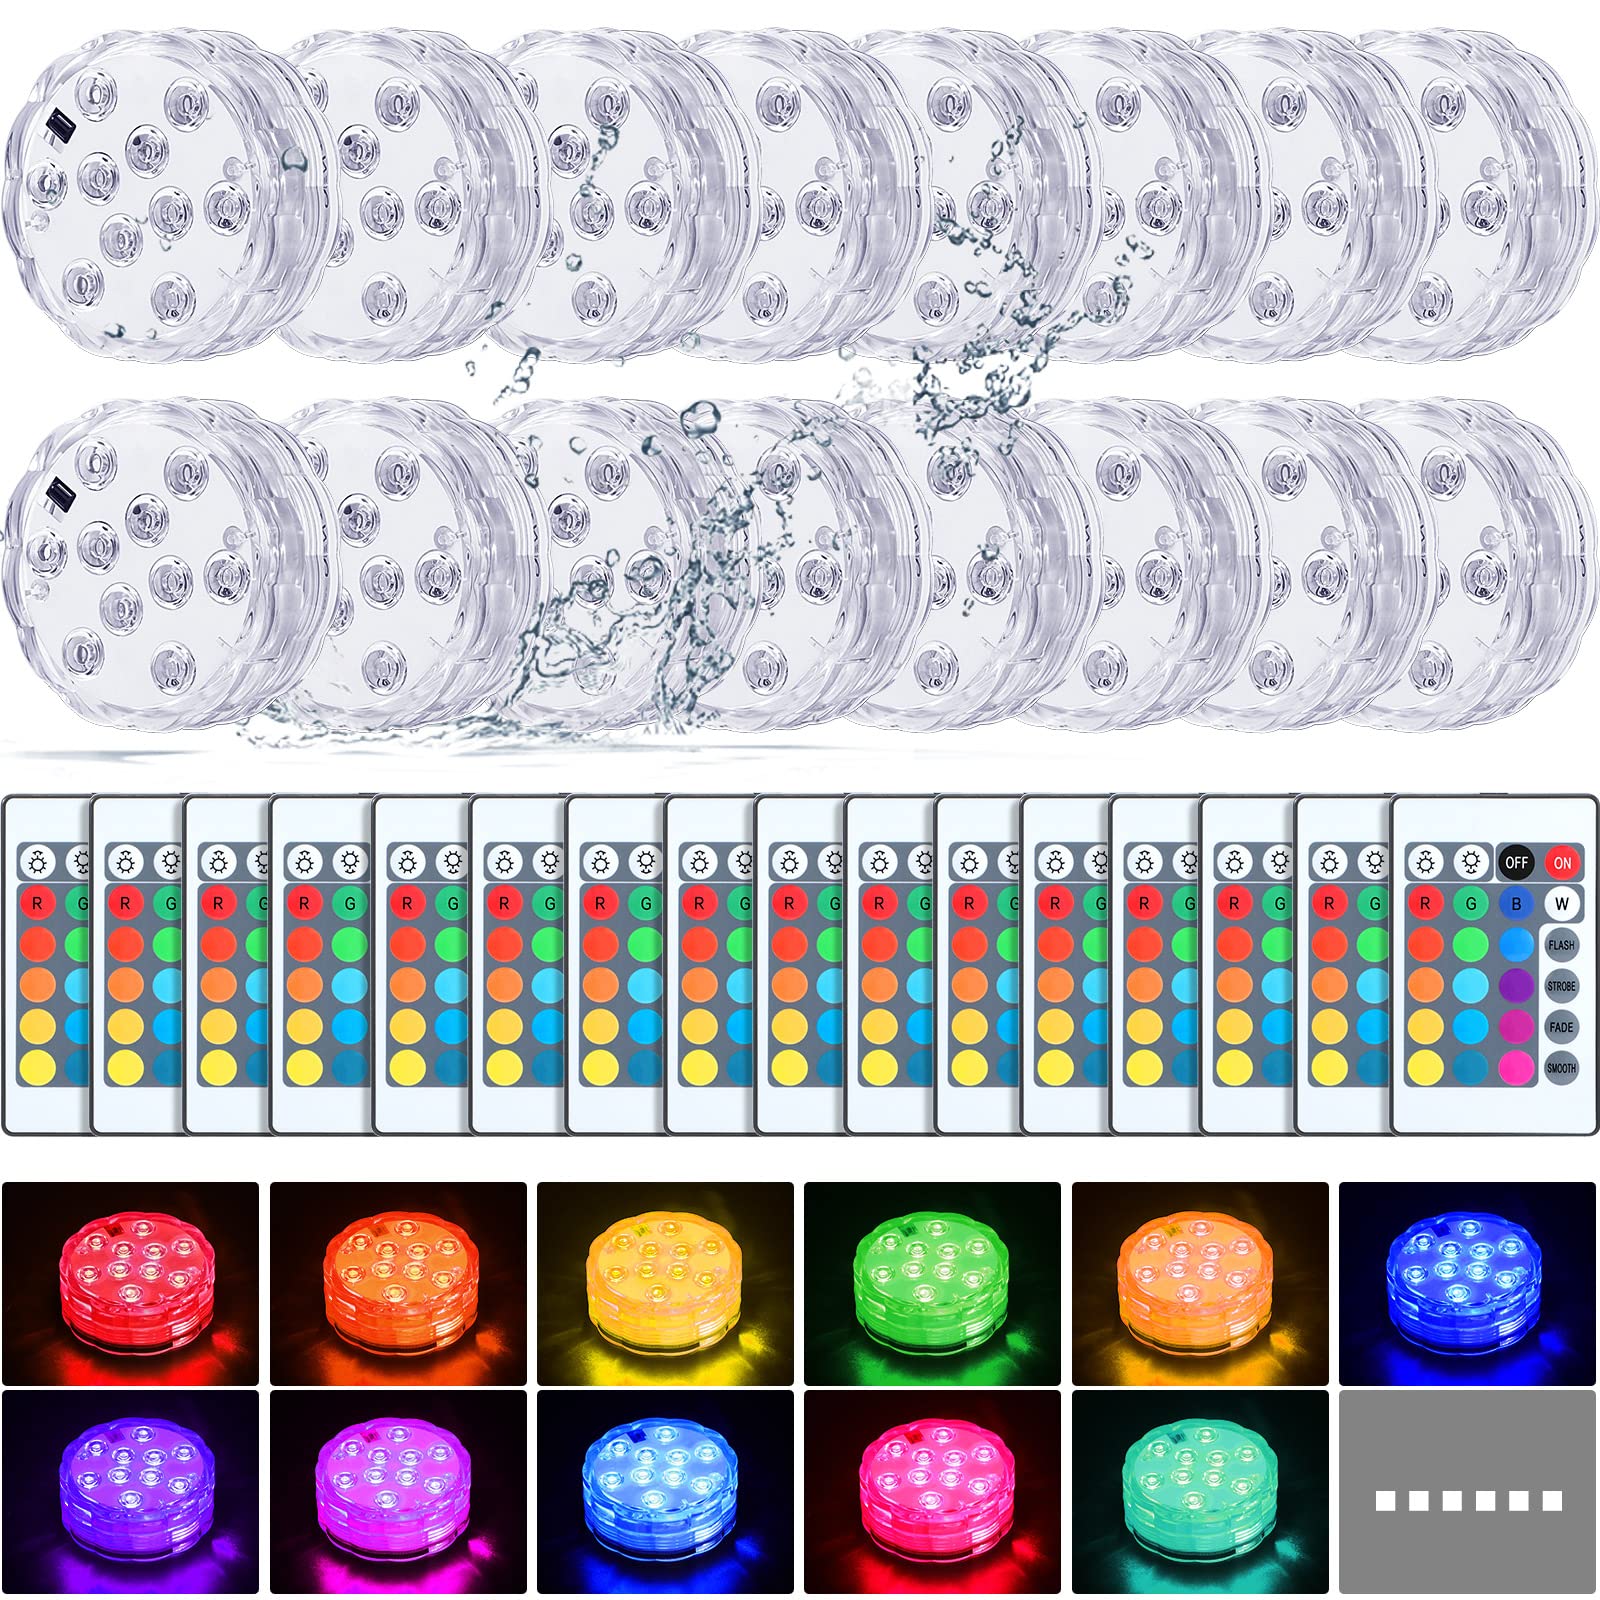 Hortsun 16 Pack Submersible LED Lights with Remote Waterproof Pool Underwater LED Light Battery Operated Bathtub Light 16 Color Changing Lamp for Tub Pool Pond Vase Aquarium Decoration